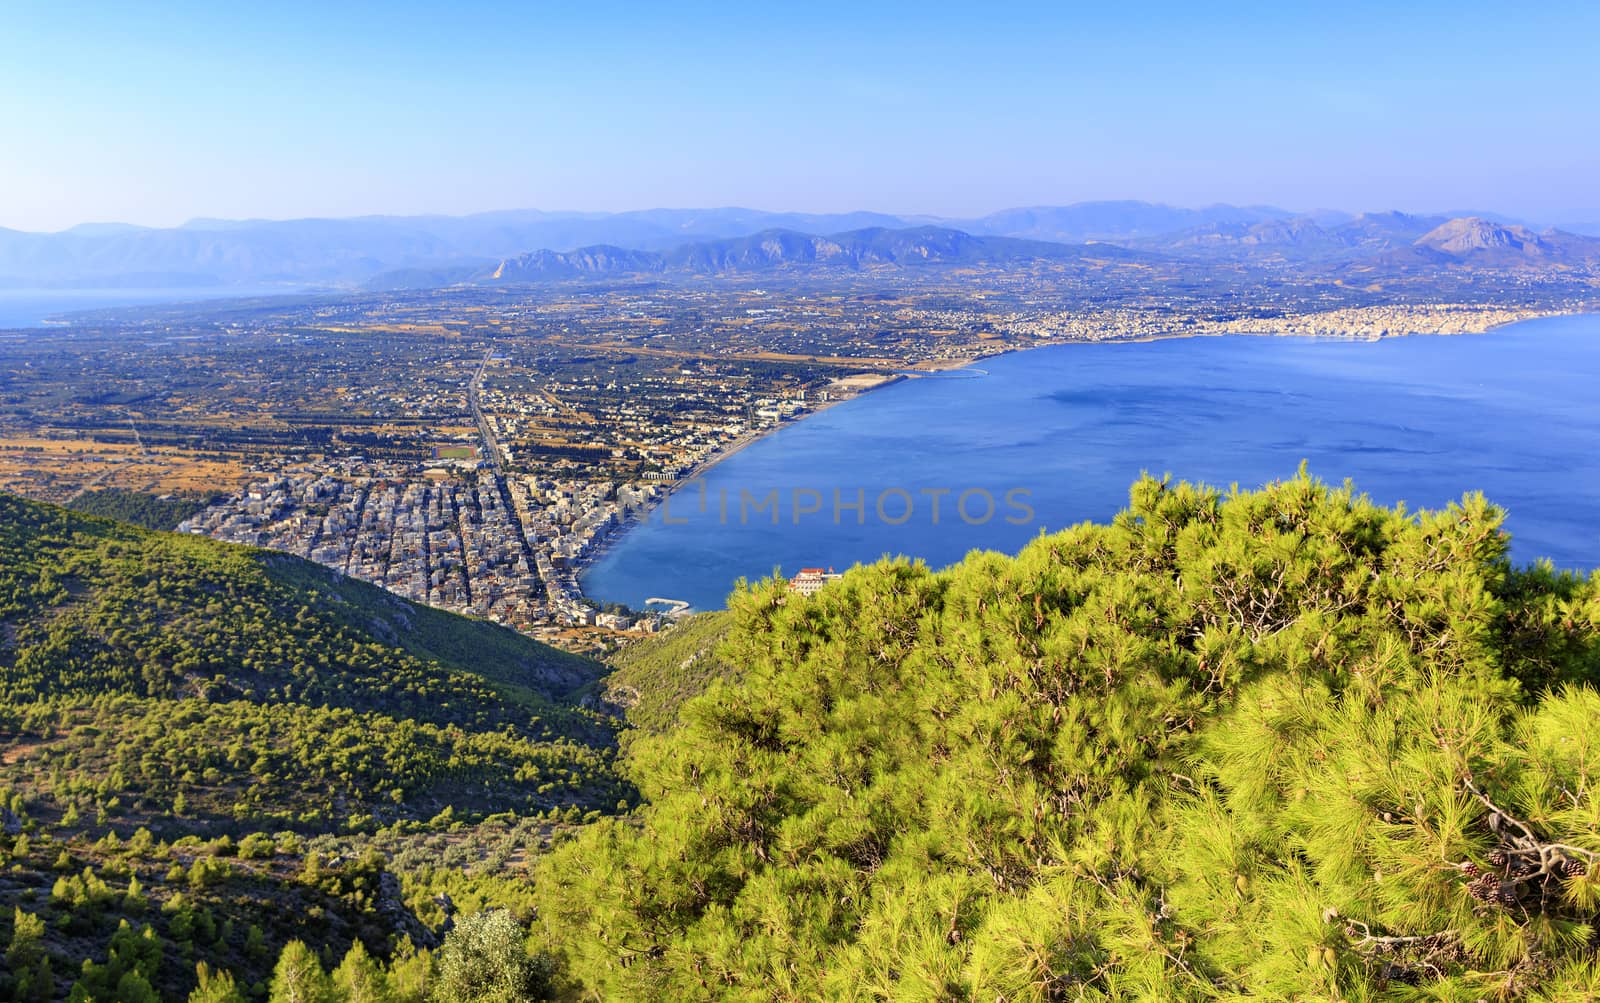 A beautiful fluffy spruce tree with cones under the bright sun against the backdrop of the city of Loutraki and the sea of blue Corinthian Gulf. by Sergii